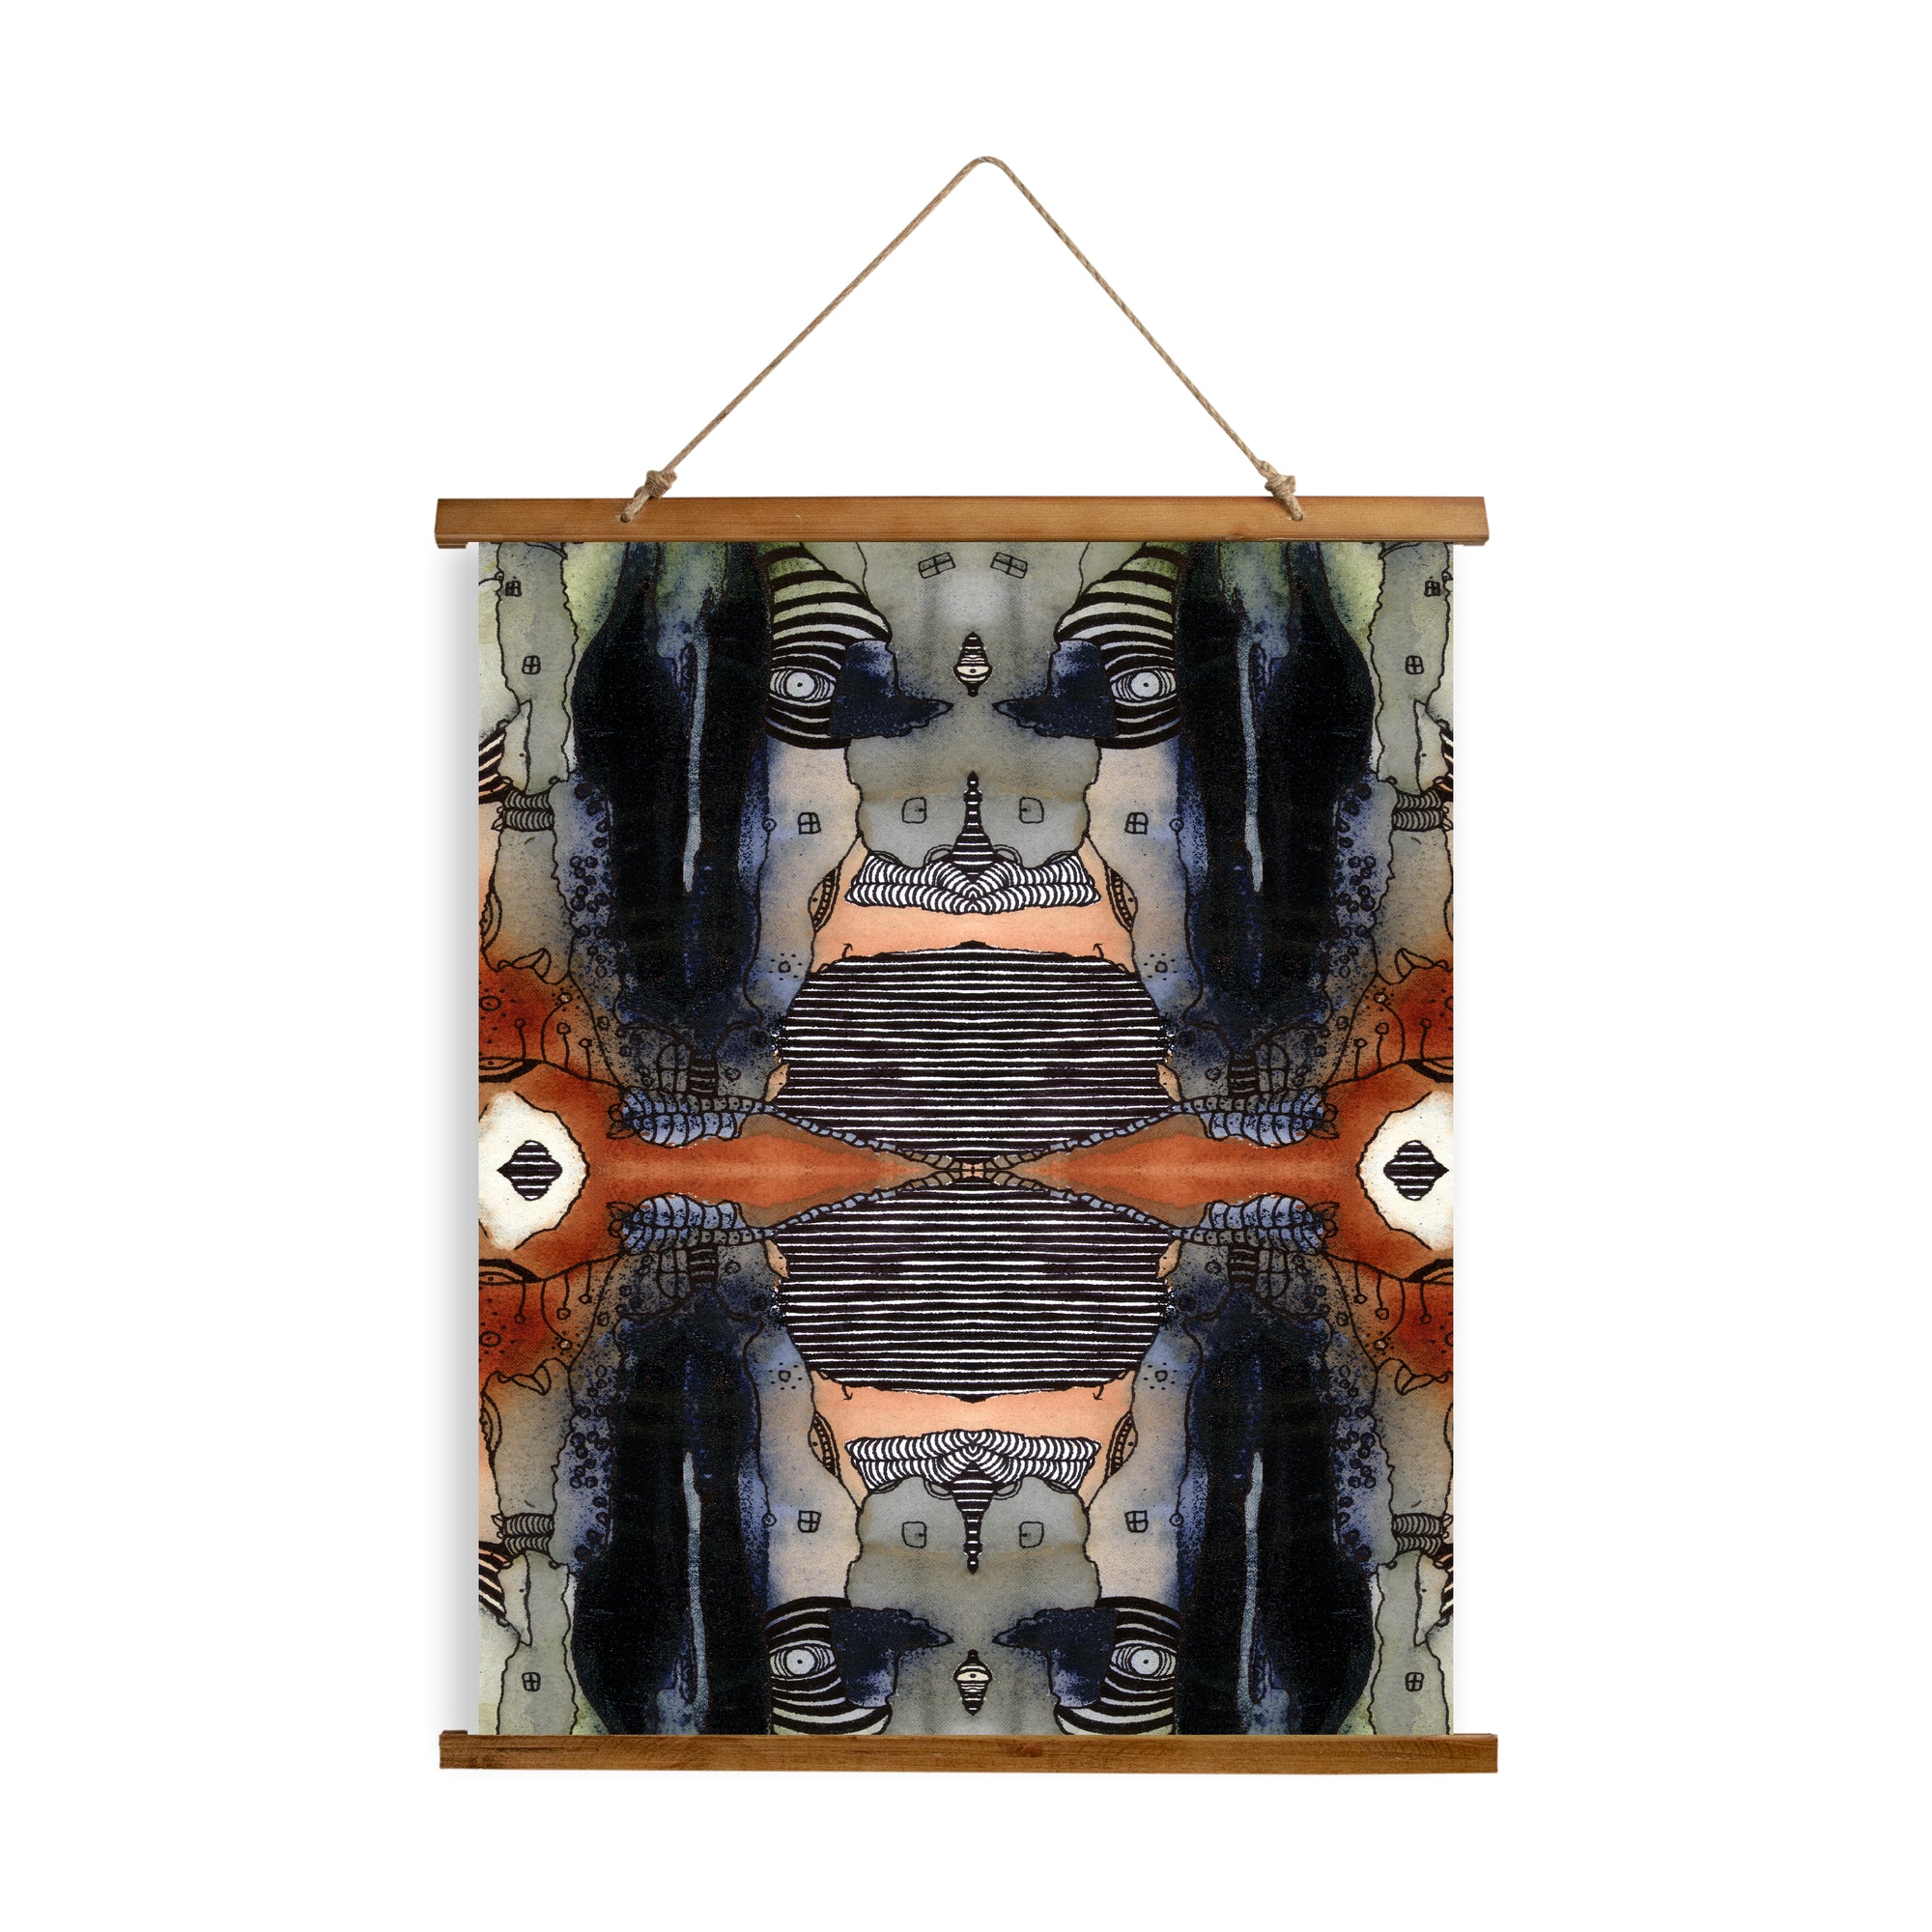 Whimsical Wood Slat Tapestry "Source 2"